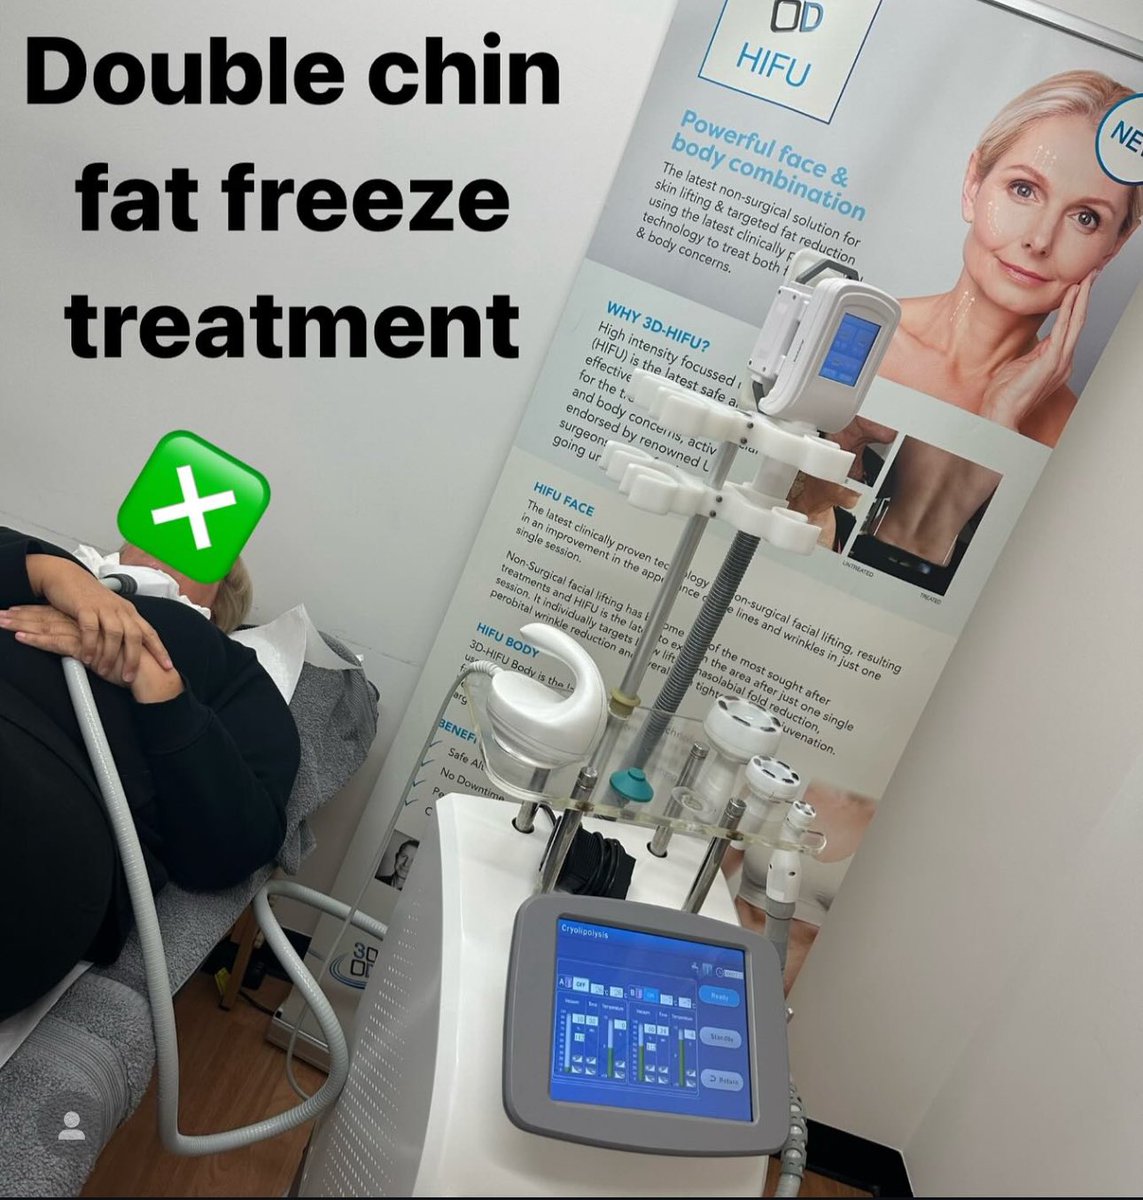 Double chin reduction by freezing the fat under the chin. Painless and with no downtime! 

#nonsurgical #doublechintreatment #fatfreezing #medicalaesthetics #seeaprofessional #awardwinning #willington #derby #derbyshire